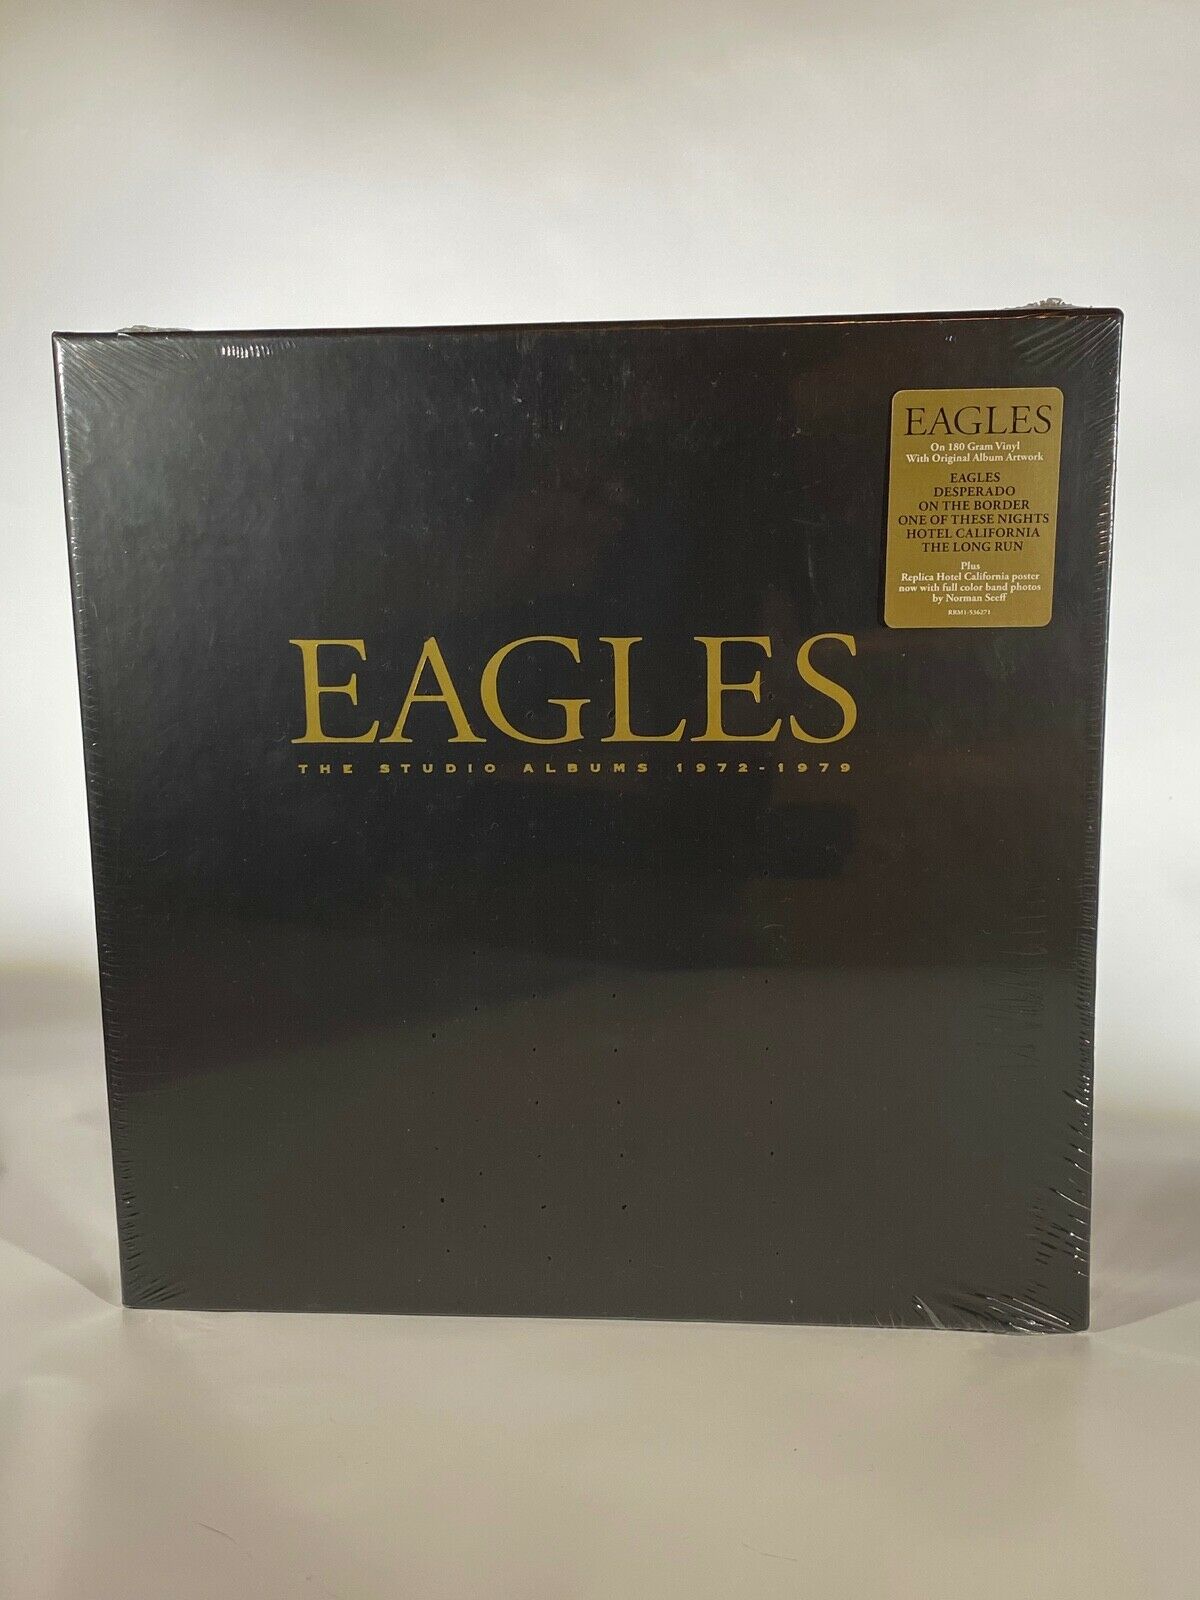 popsike.com - THE EAGLES, STUDIO ALBUMS 1972-79, LIMITED EDITION